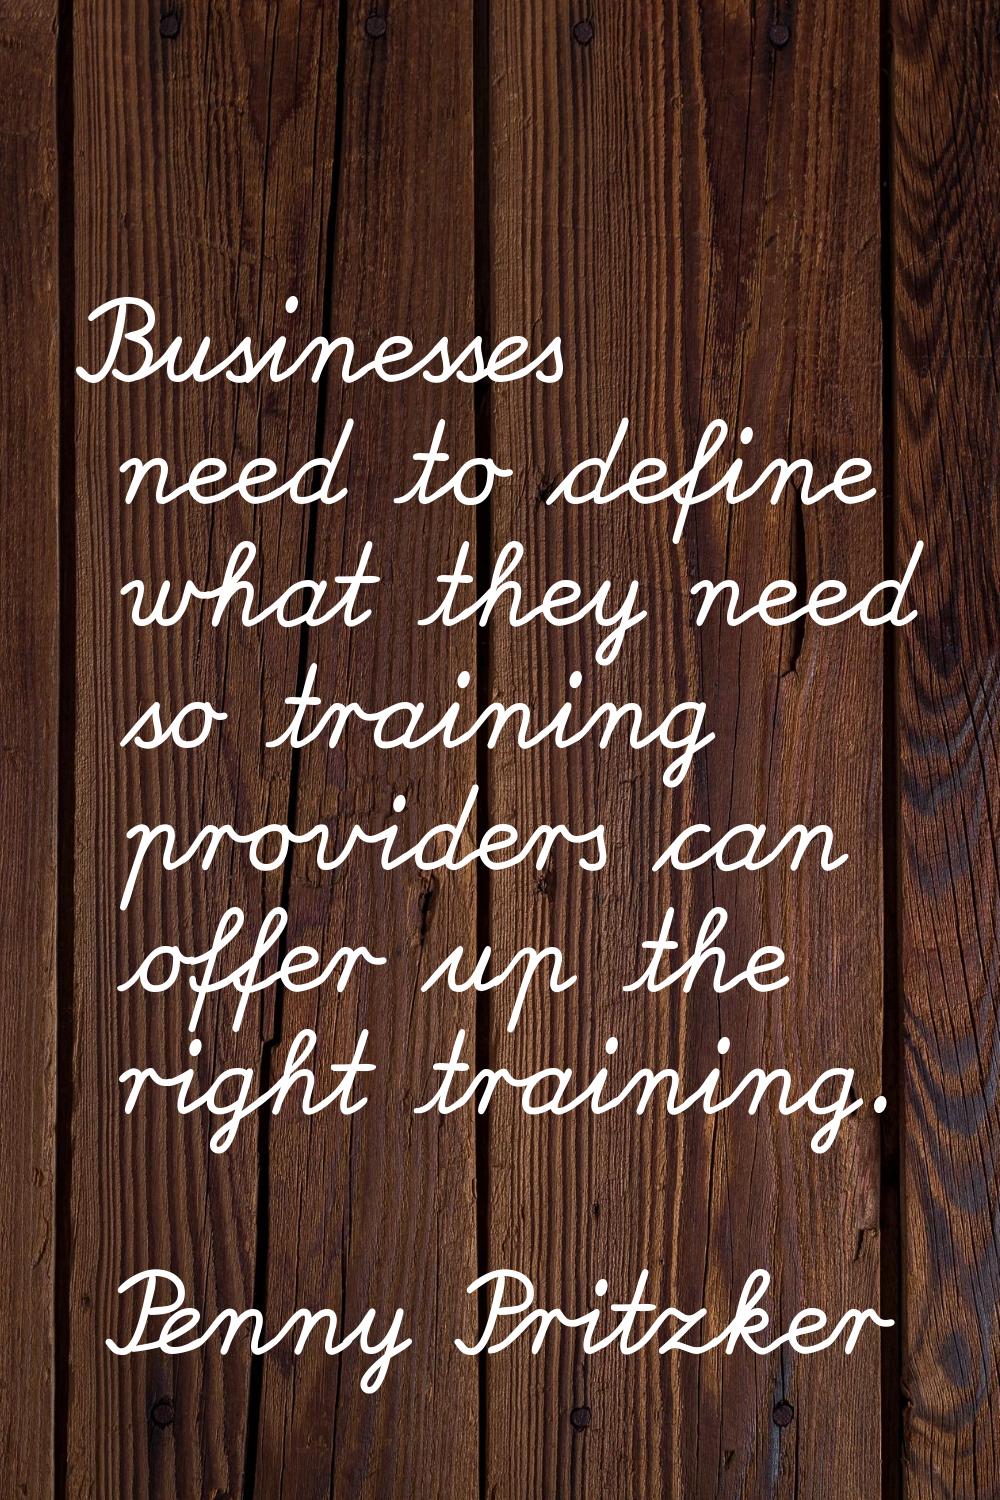 Businesses need to define what they need so training providers can offer up the right training.